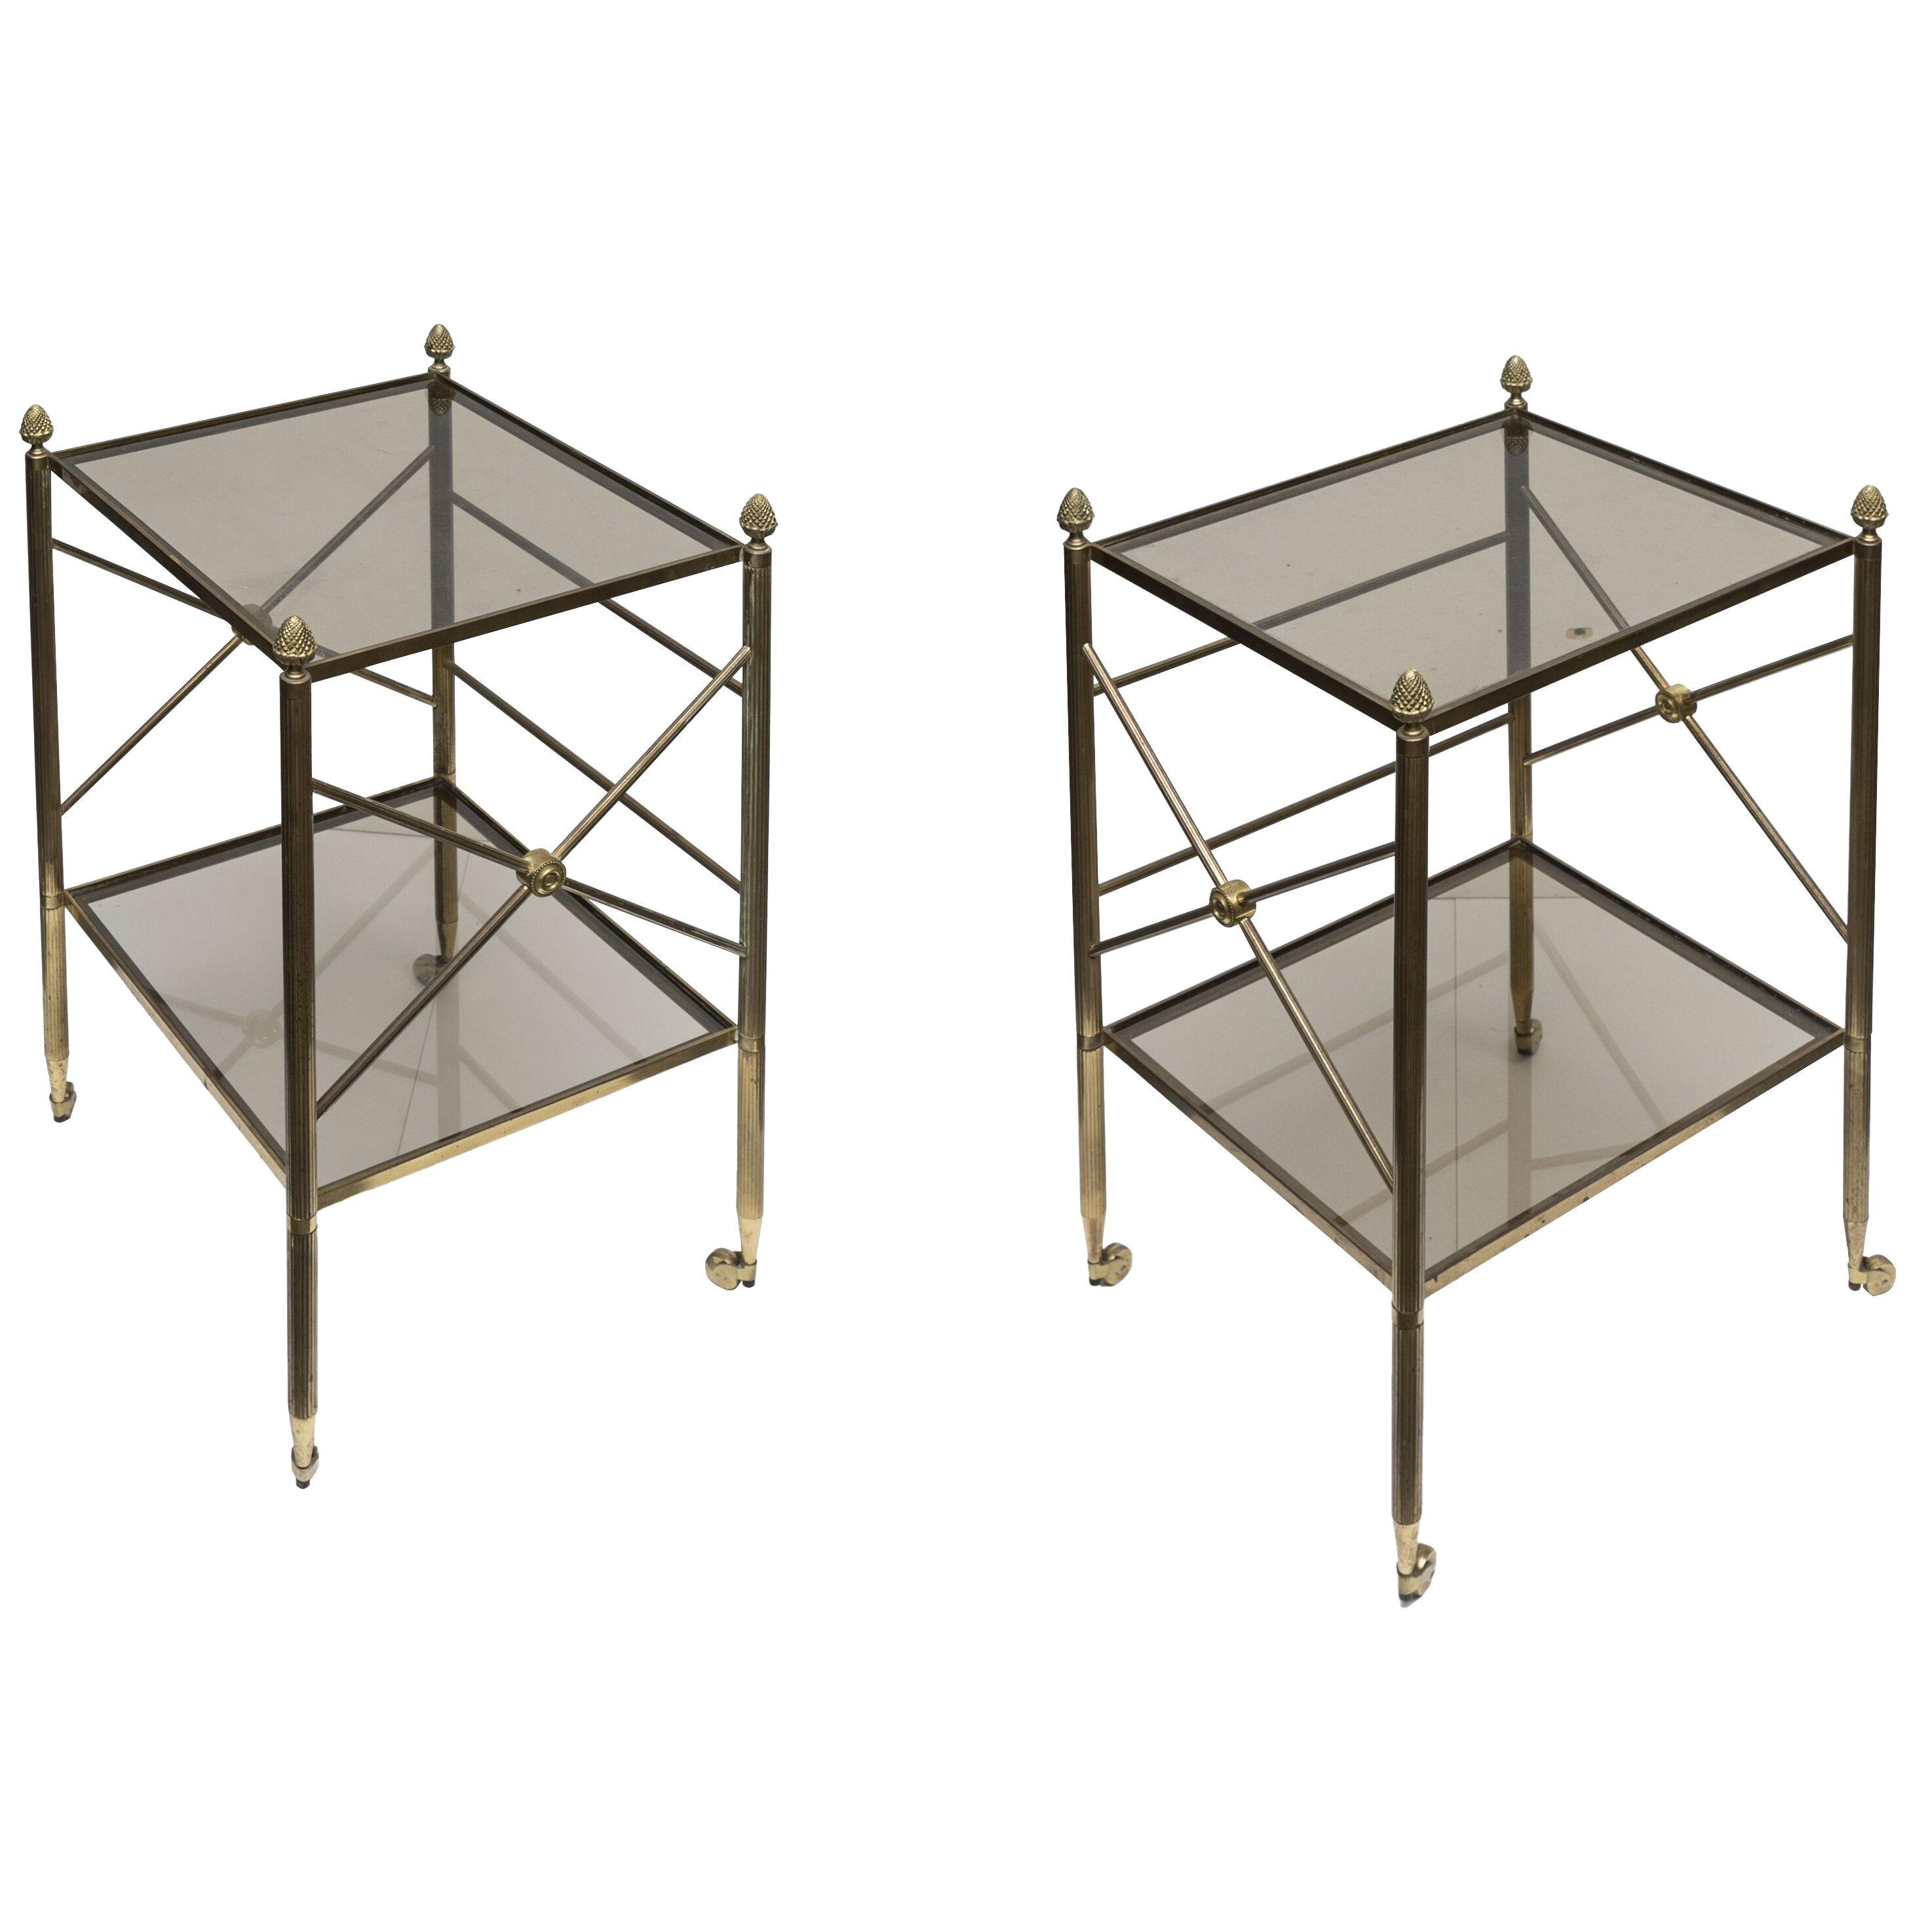 Pair of side tables / bedside tables neo-classic style.